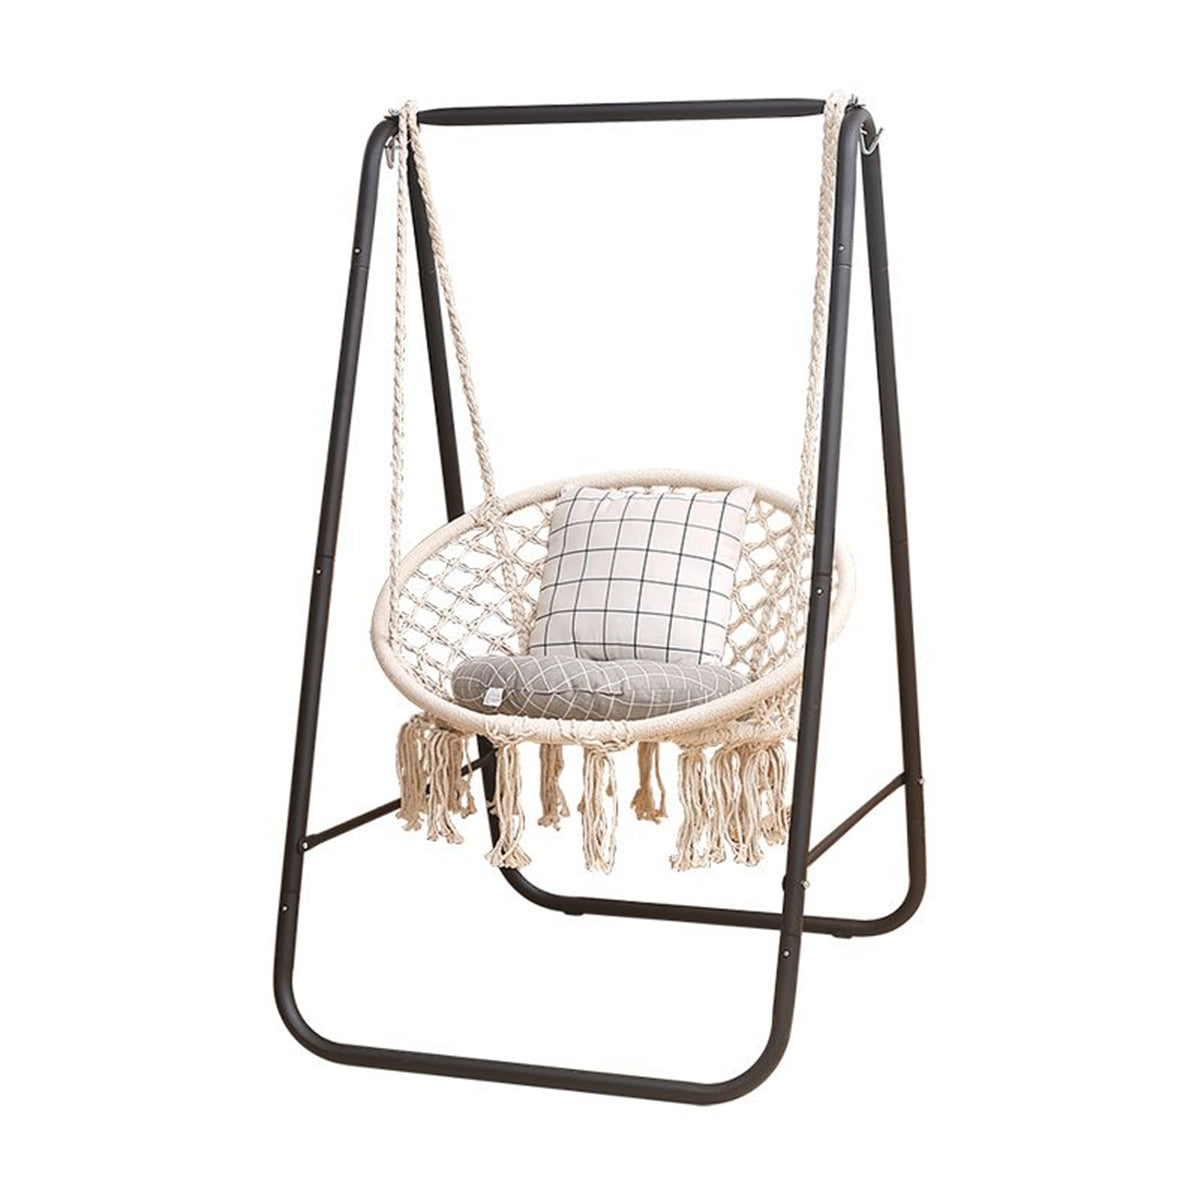 Hammock Chair Hanging Chair Swing with Stand with Heavy Duty